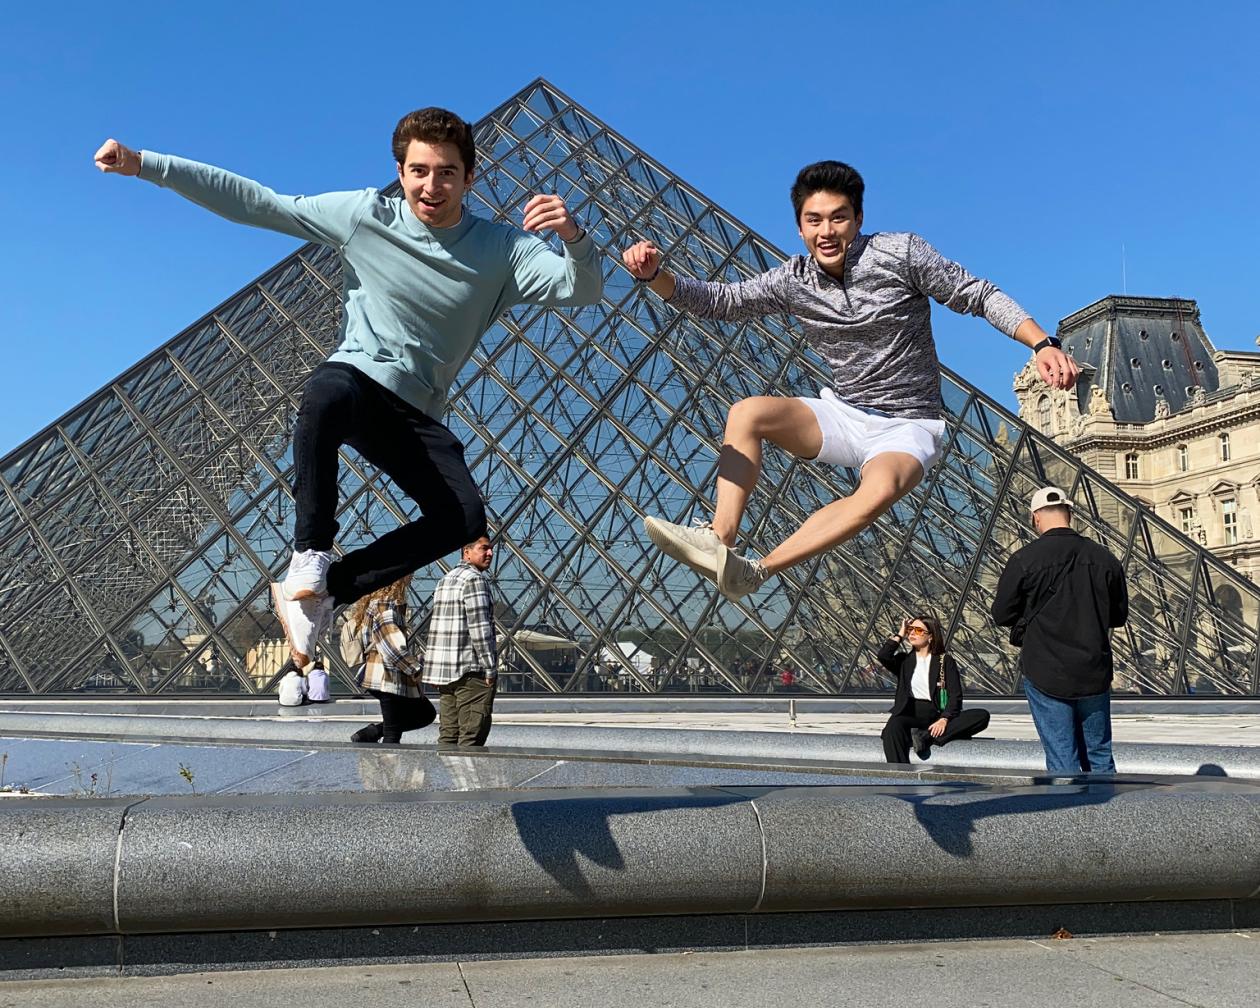 Two students are jumping and smiling in front of the Louvre Pyramid in Paris, France.